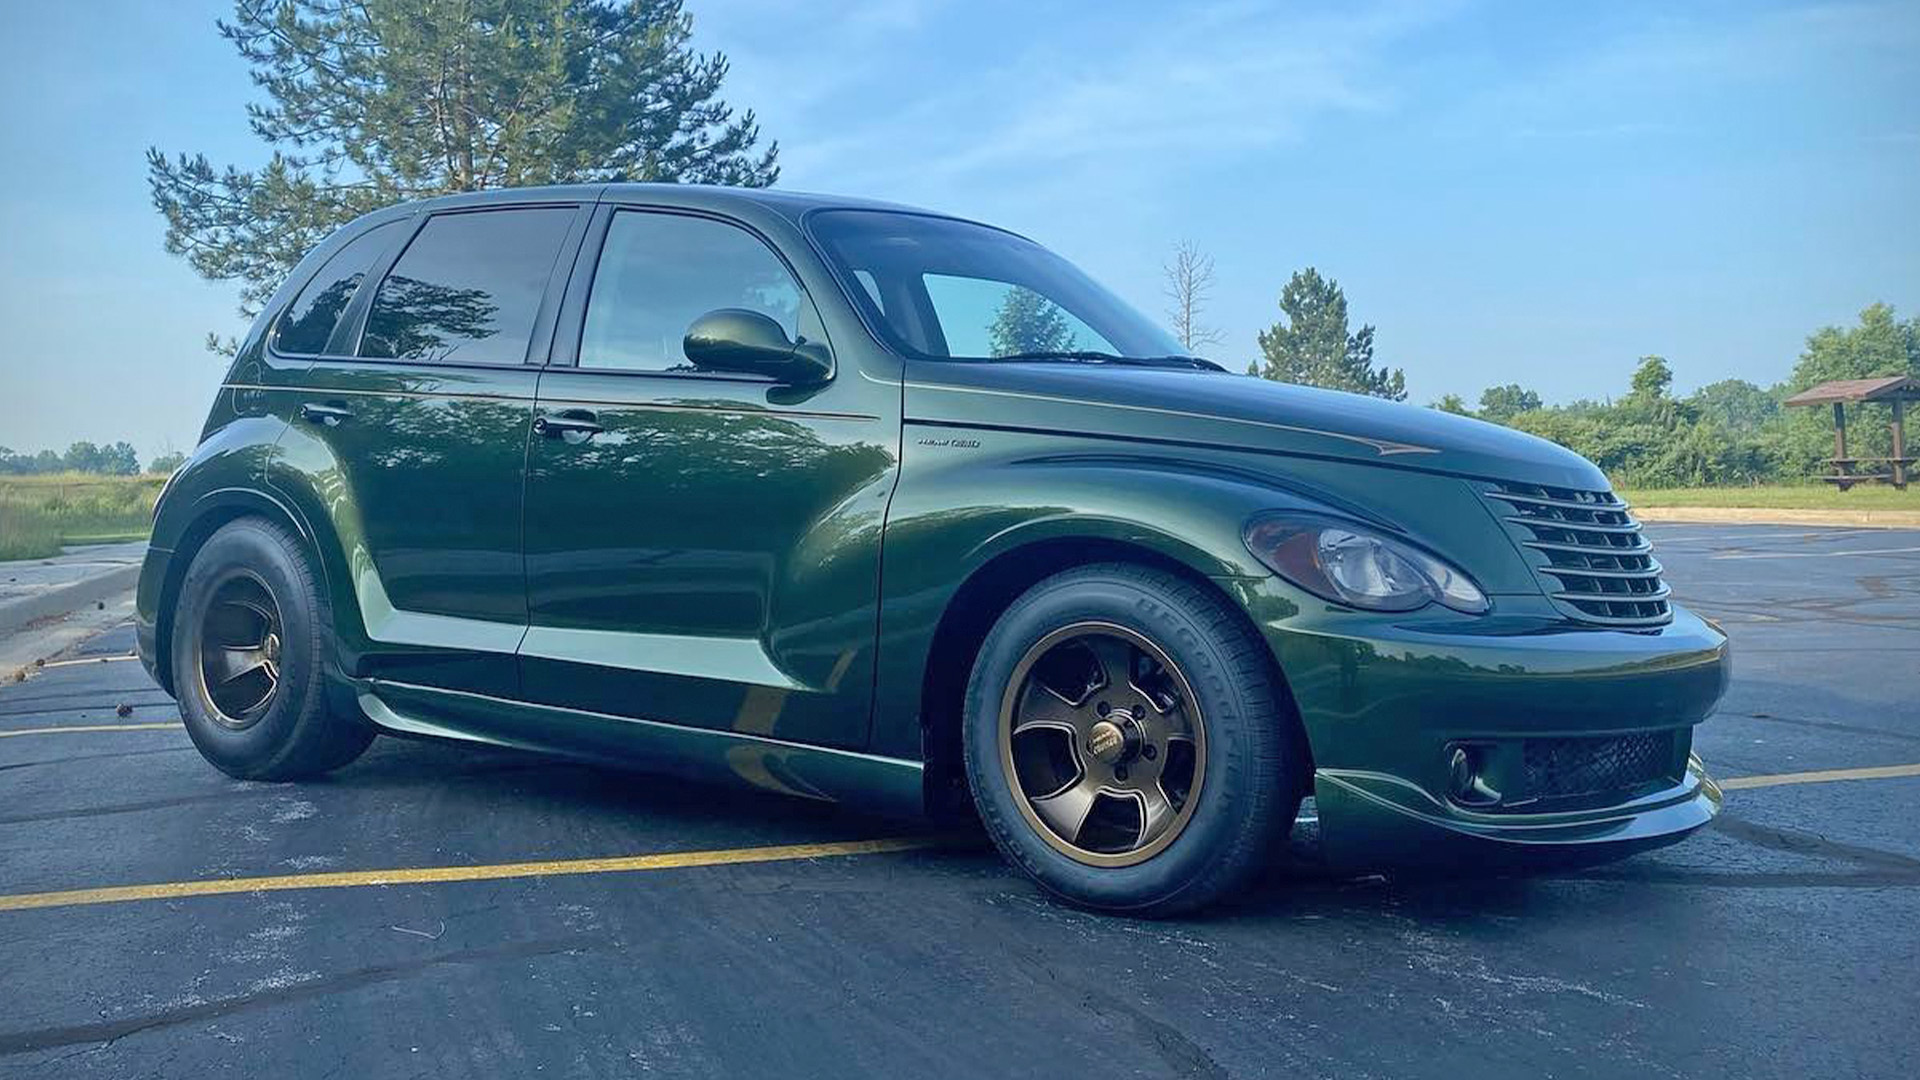 This V8-Swapped RWD Chrysler PT Cruiser Build Is Impossible to Hate